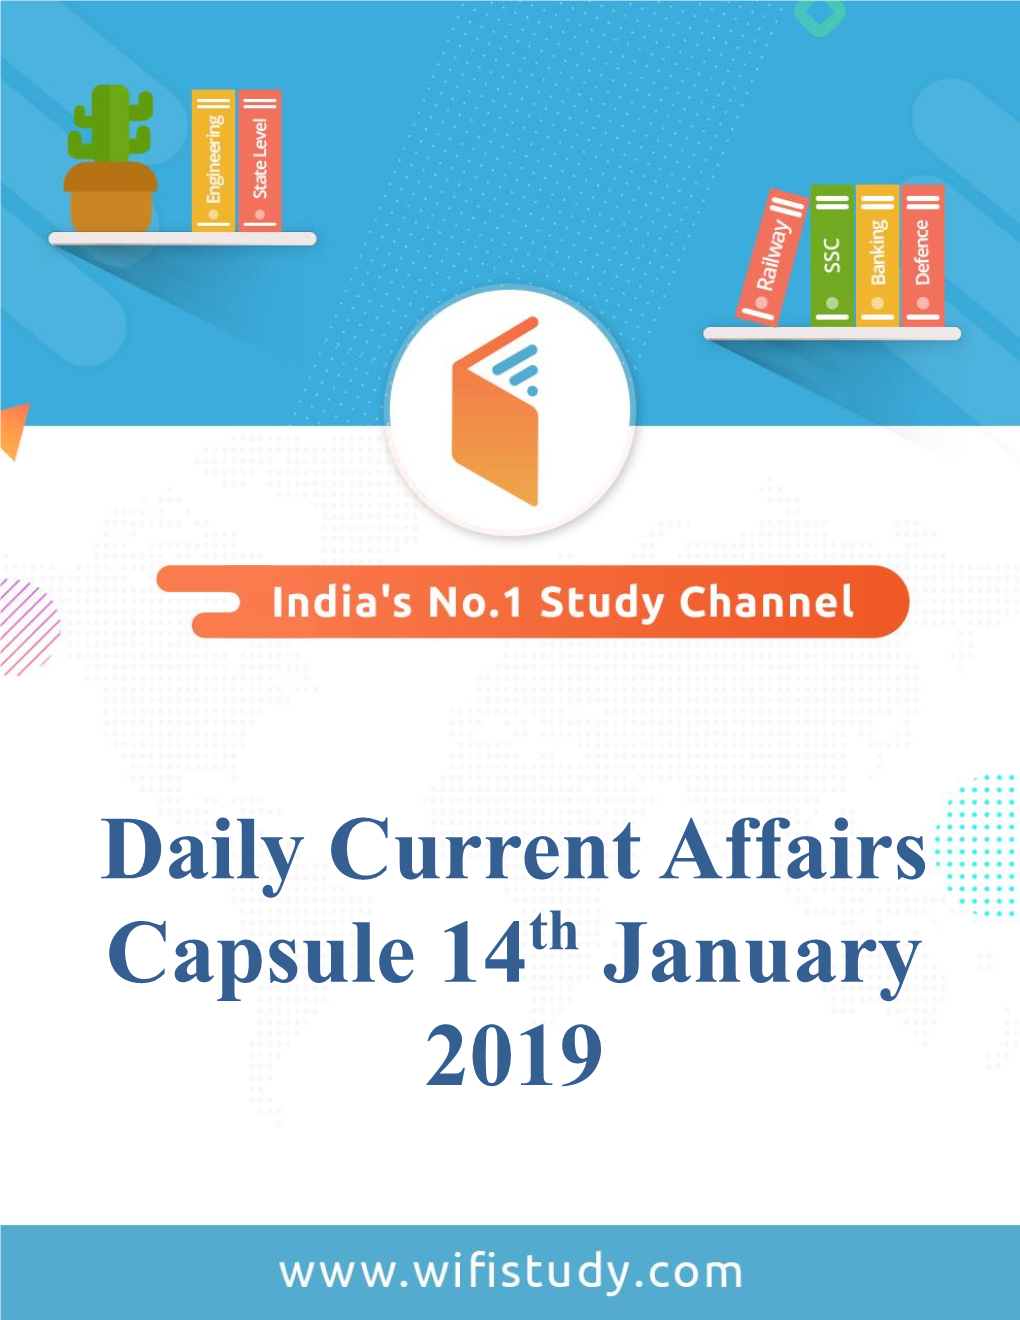 Daily Current Affairs Capsule 14 January 2019